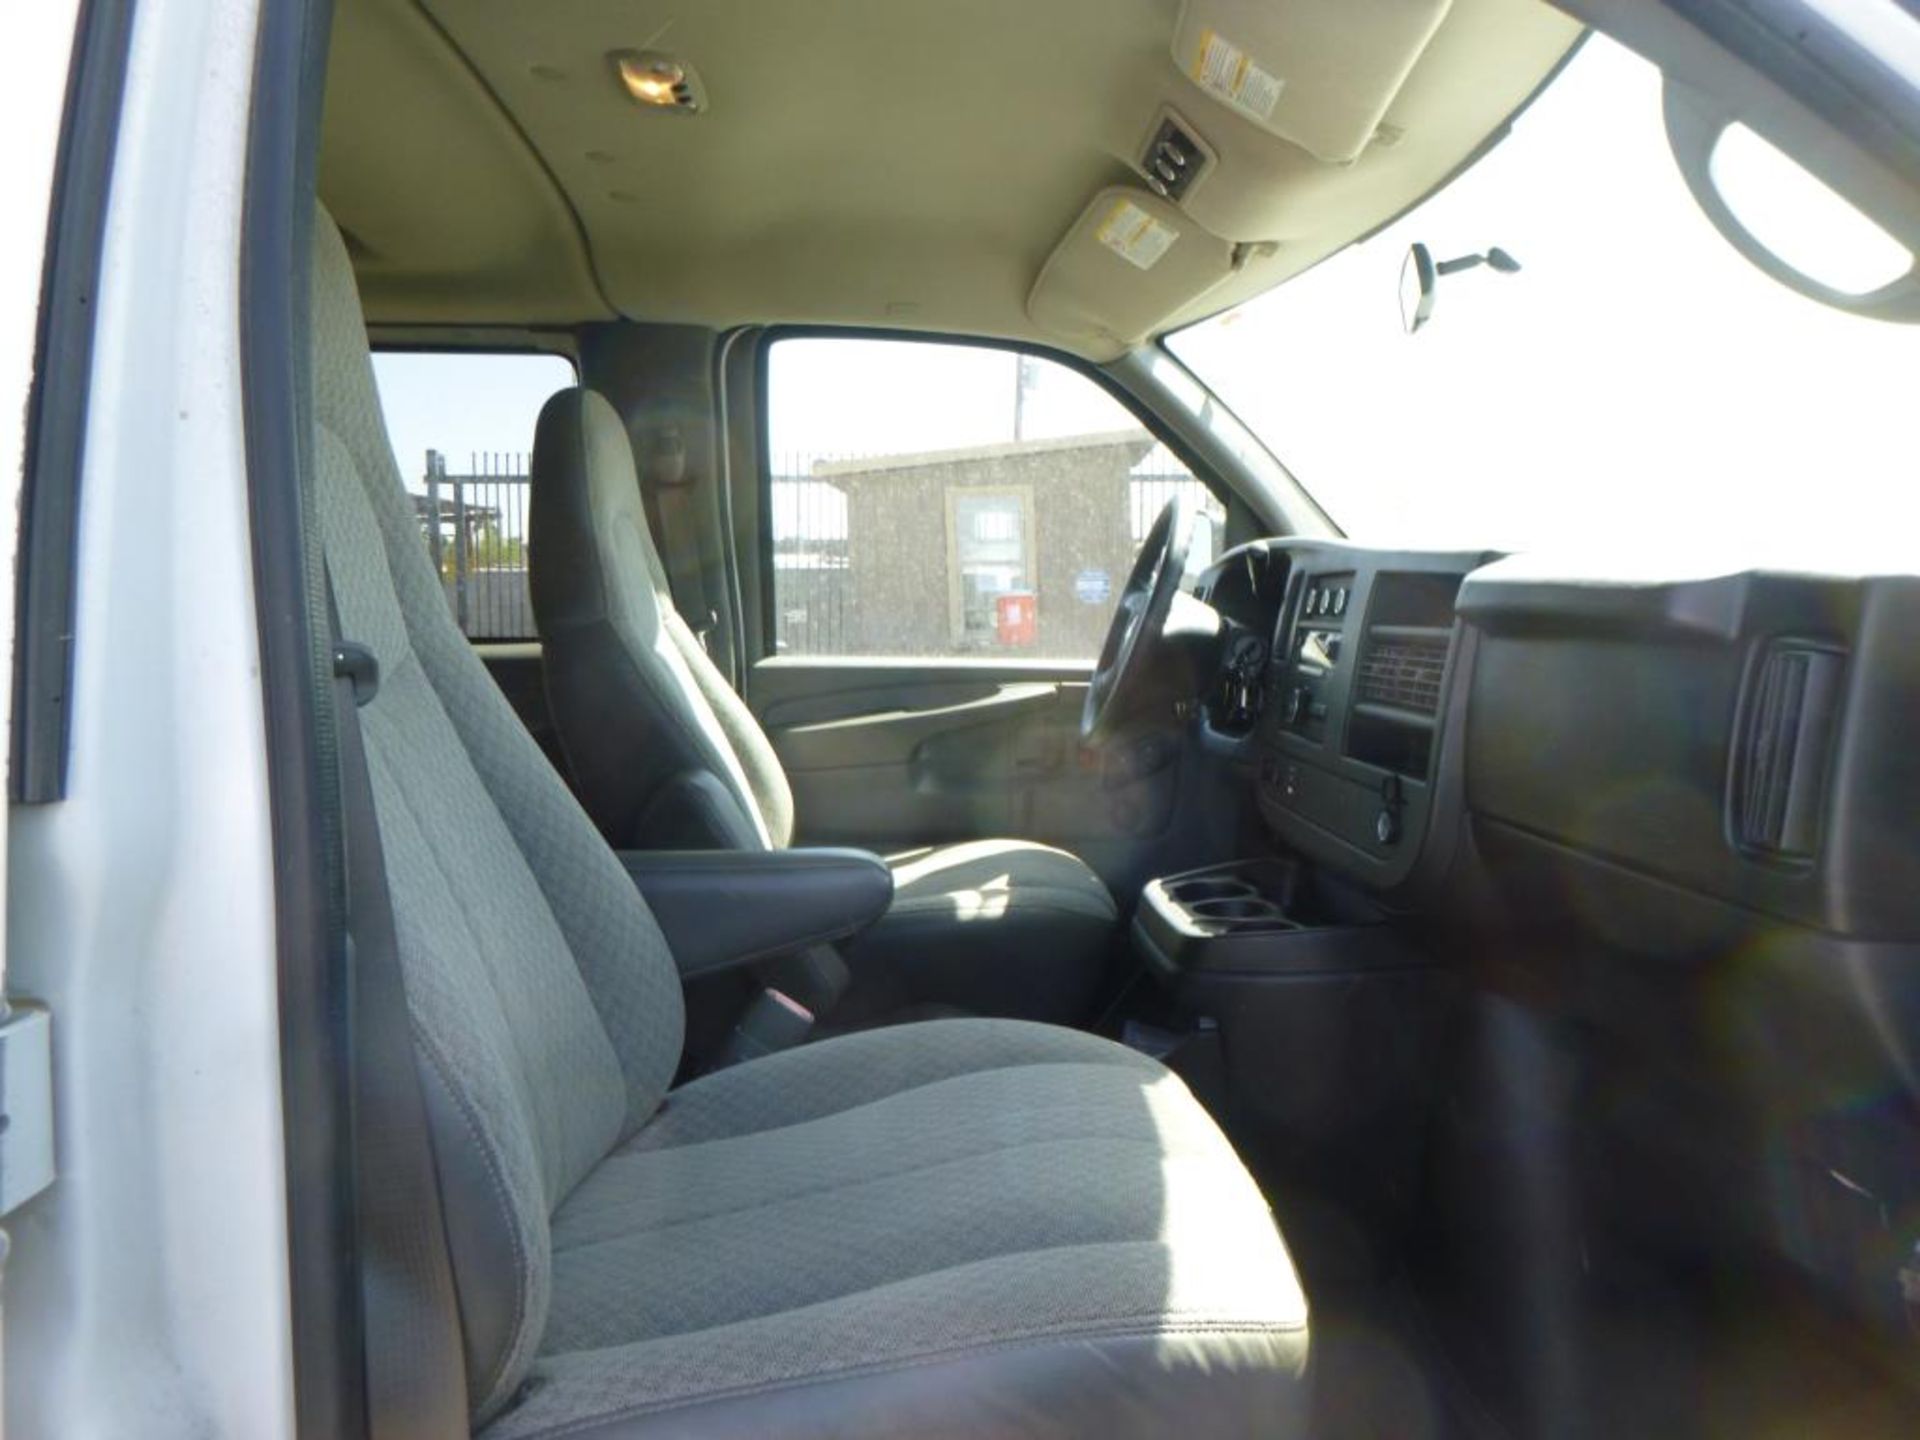 2008 Chevrolet Express - Image 9 of 14